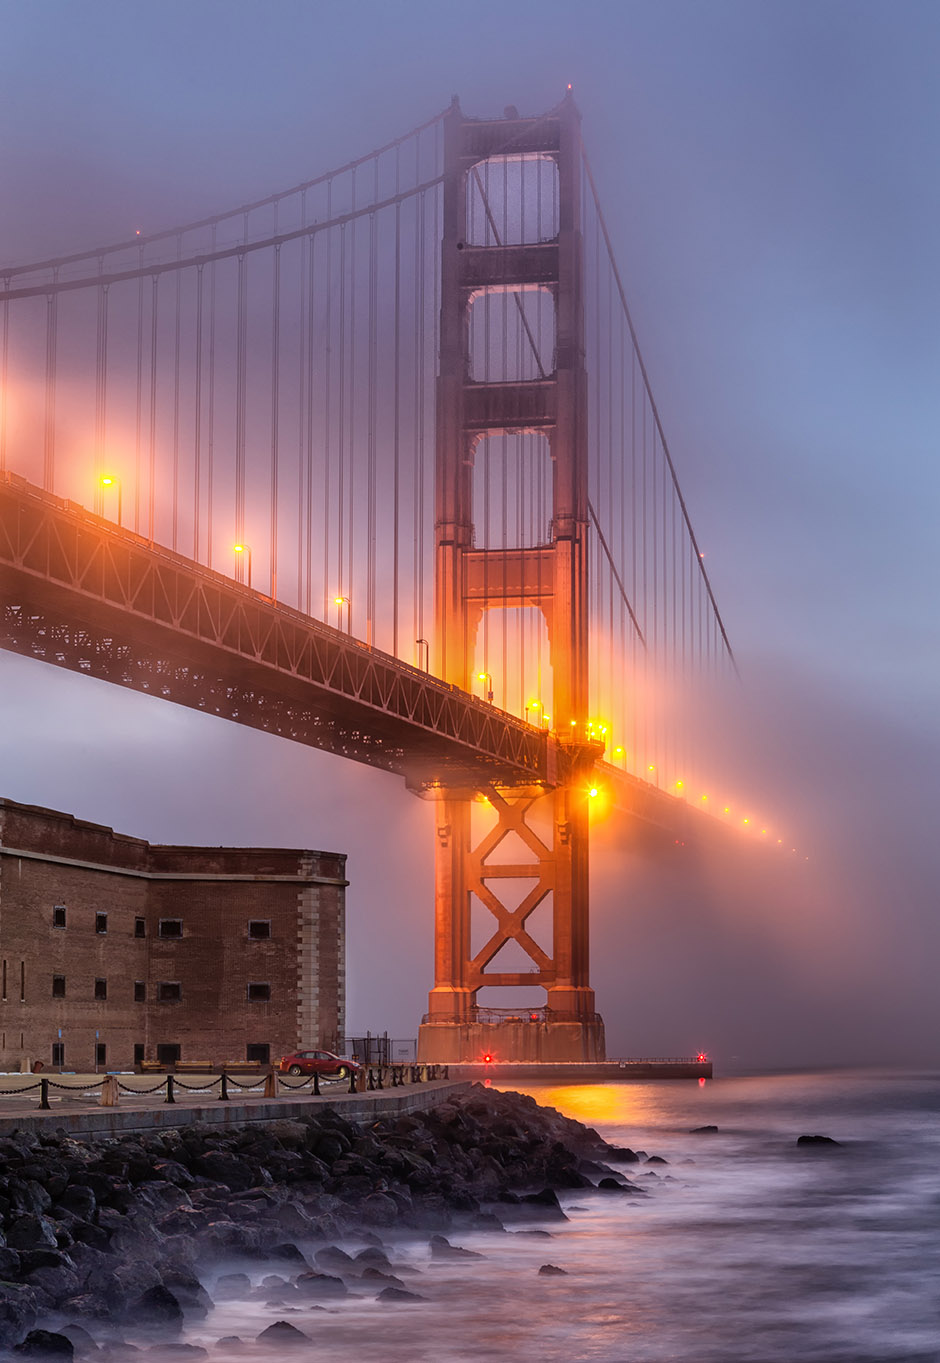 The Golden Gate Bridge spans the Golden Gate Strait between San Francisco and the Pacific Ocean. This suspension bridge is 1.7 miles long and 90 feet wide. The two towers reach 746 feet above the water.